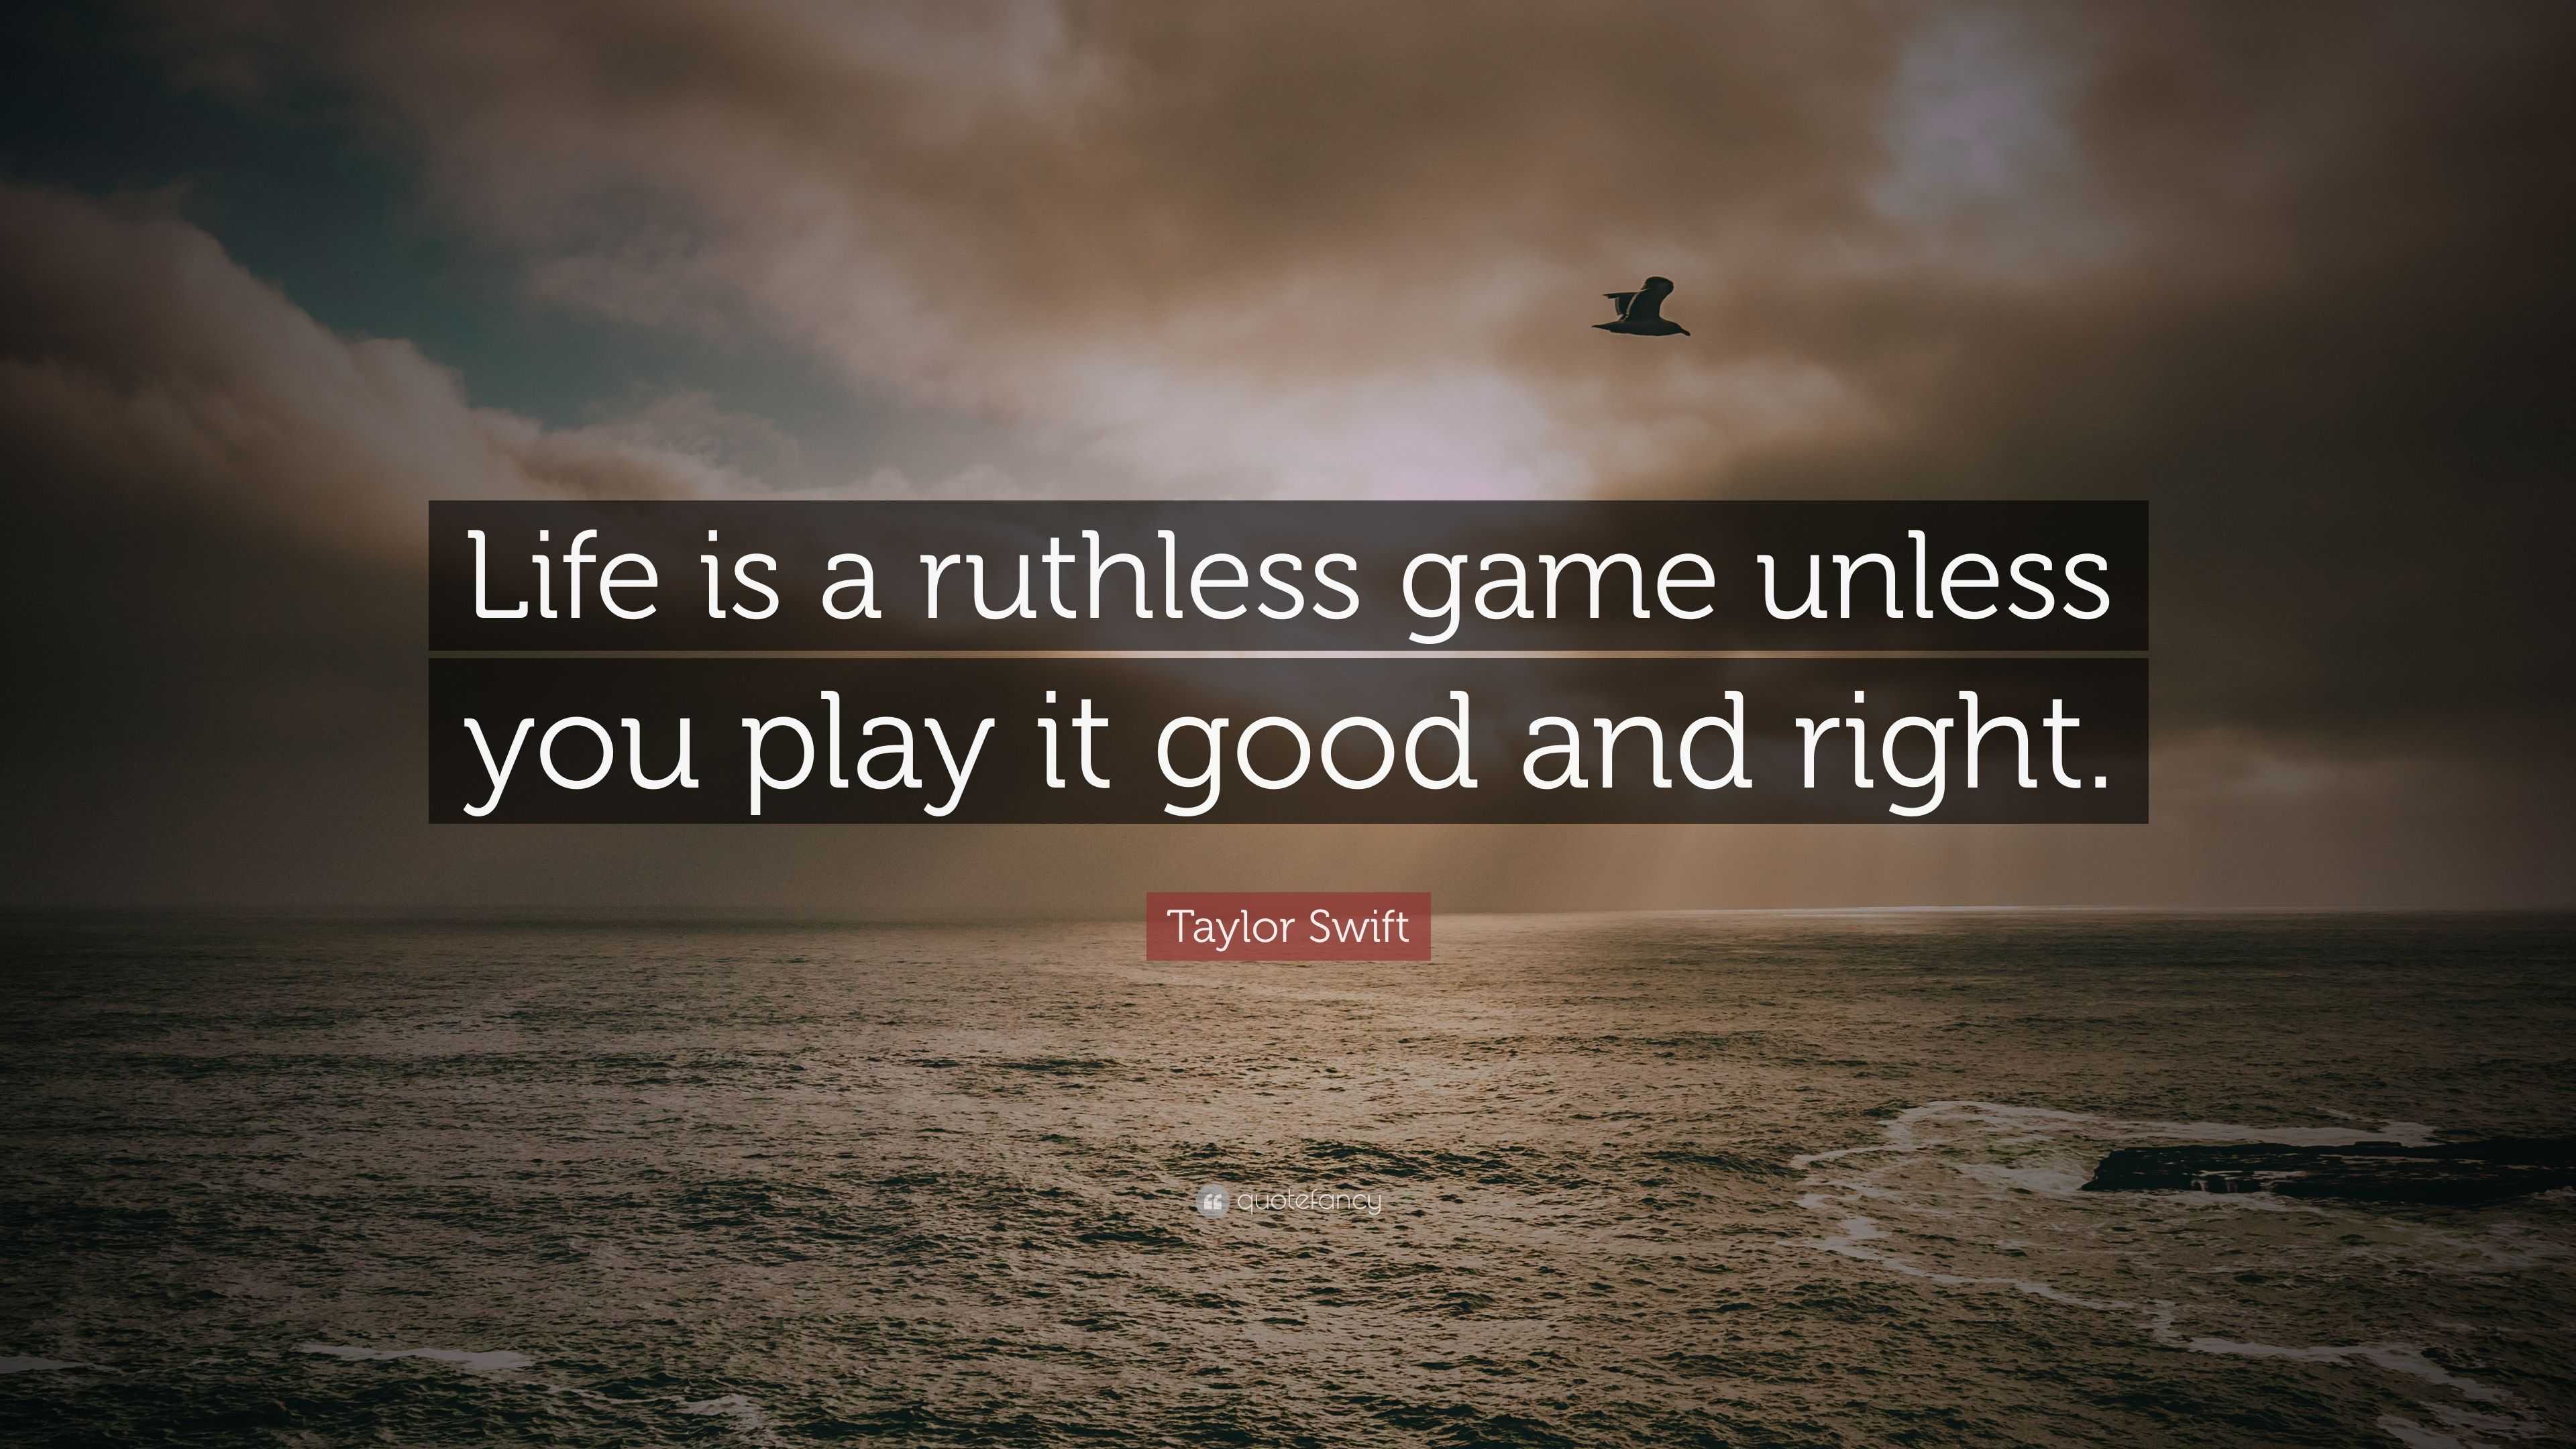 Taylor Swift Quote: “Life is a ruthless game unless you play it good and  right.”